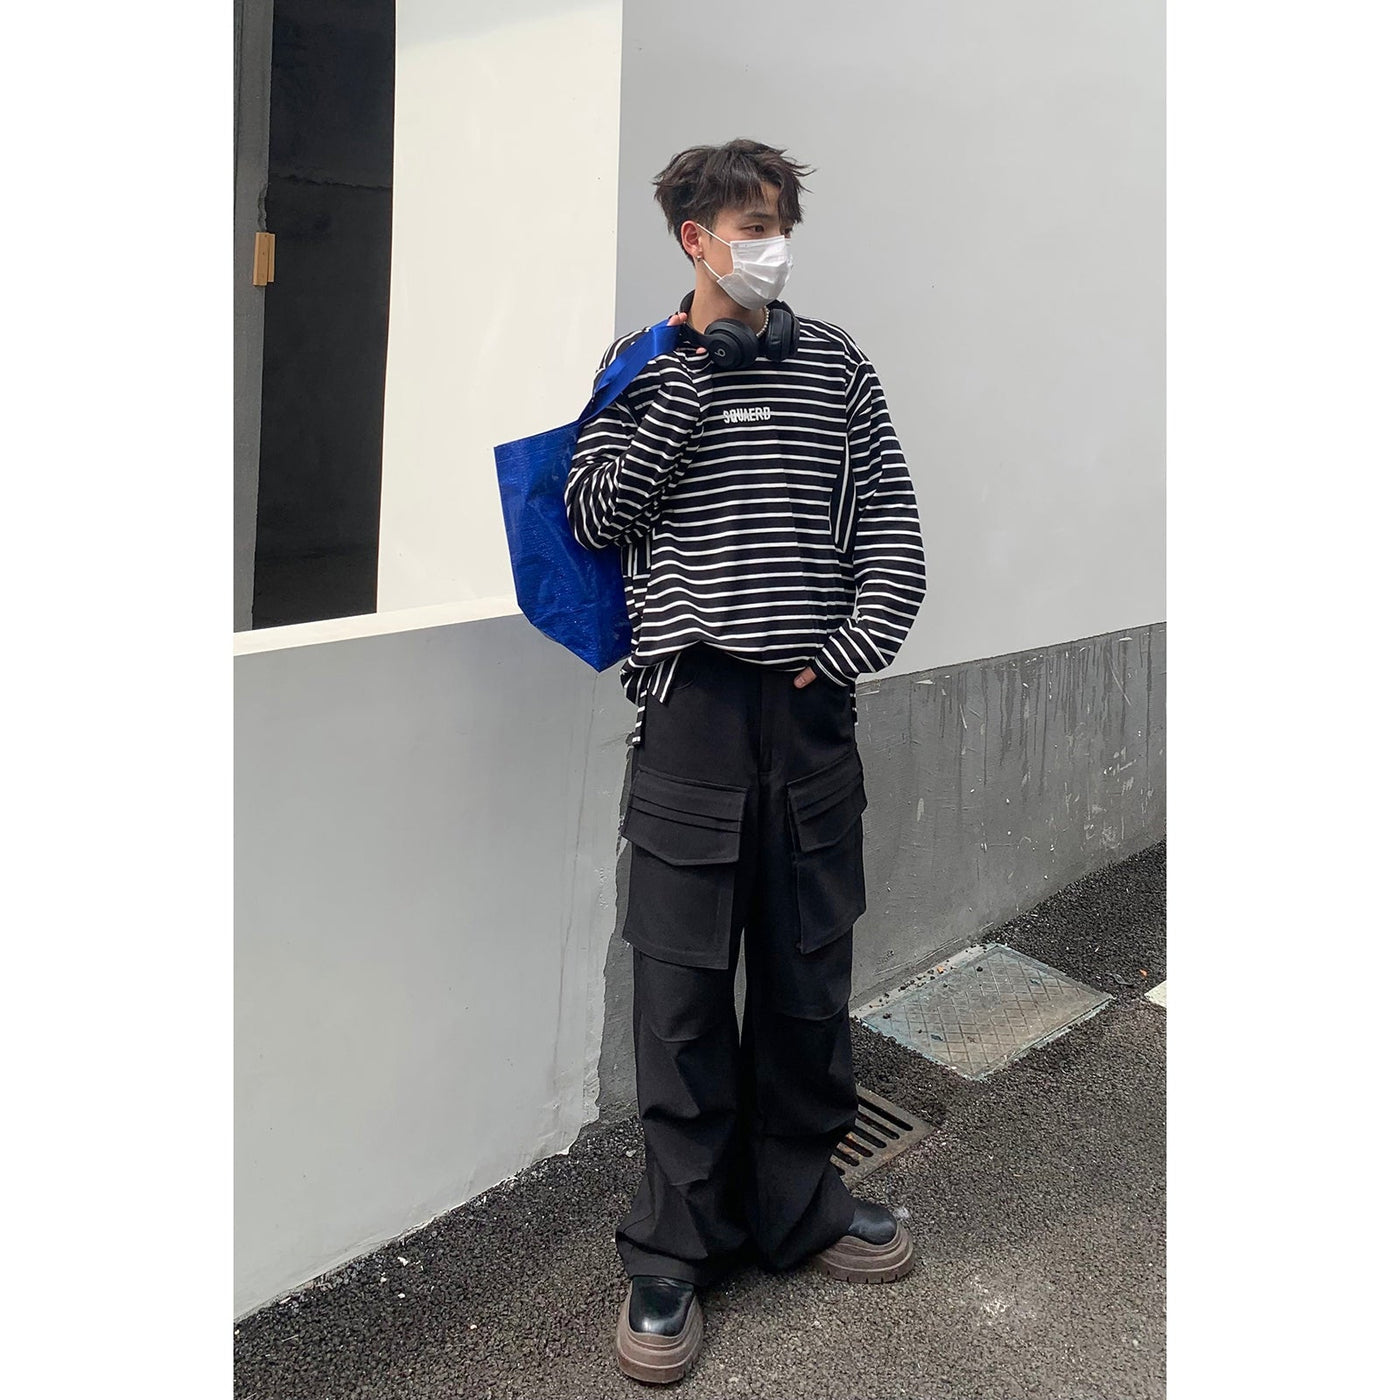 Flap Pockets Cargo Pants Korean Street Fashion Pants By Poikilotherm Shop Online at OH Vault